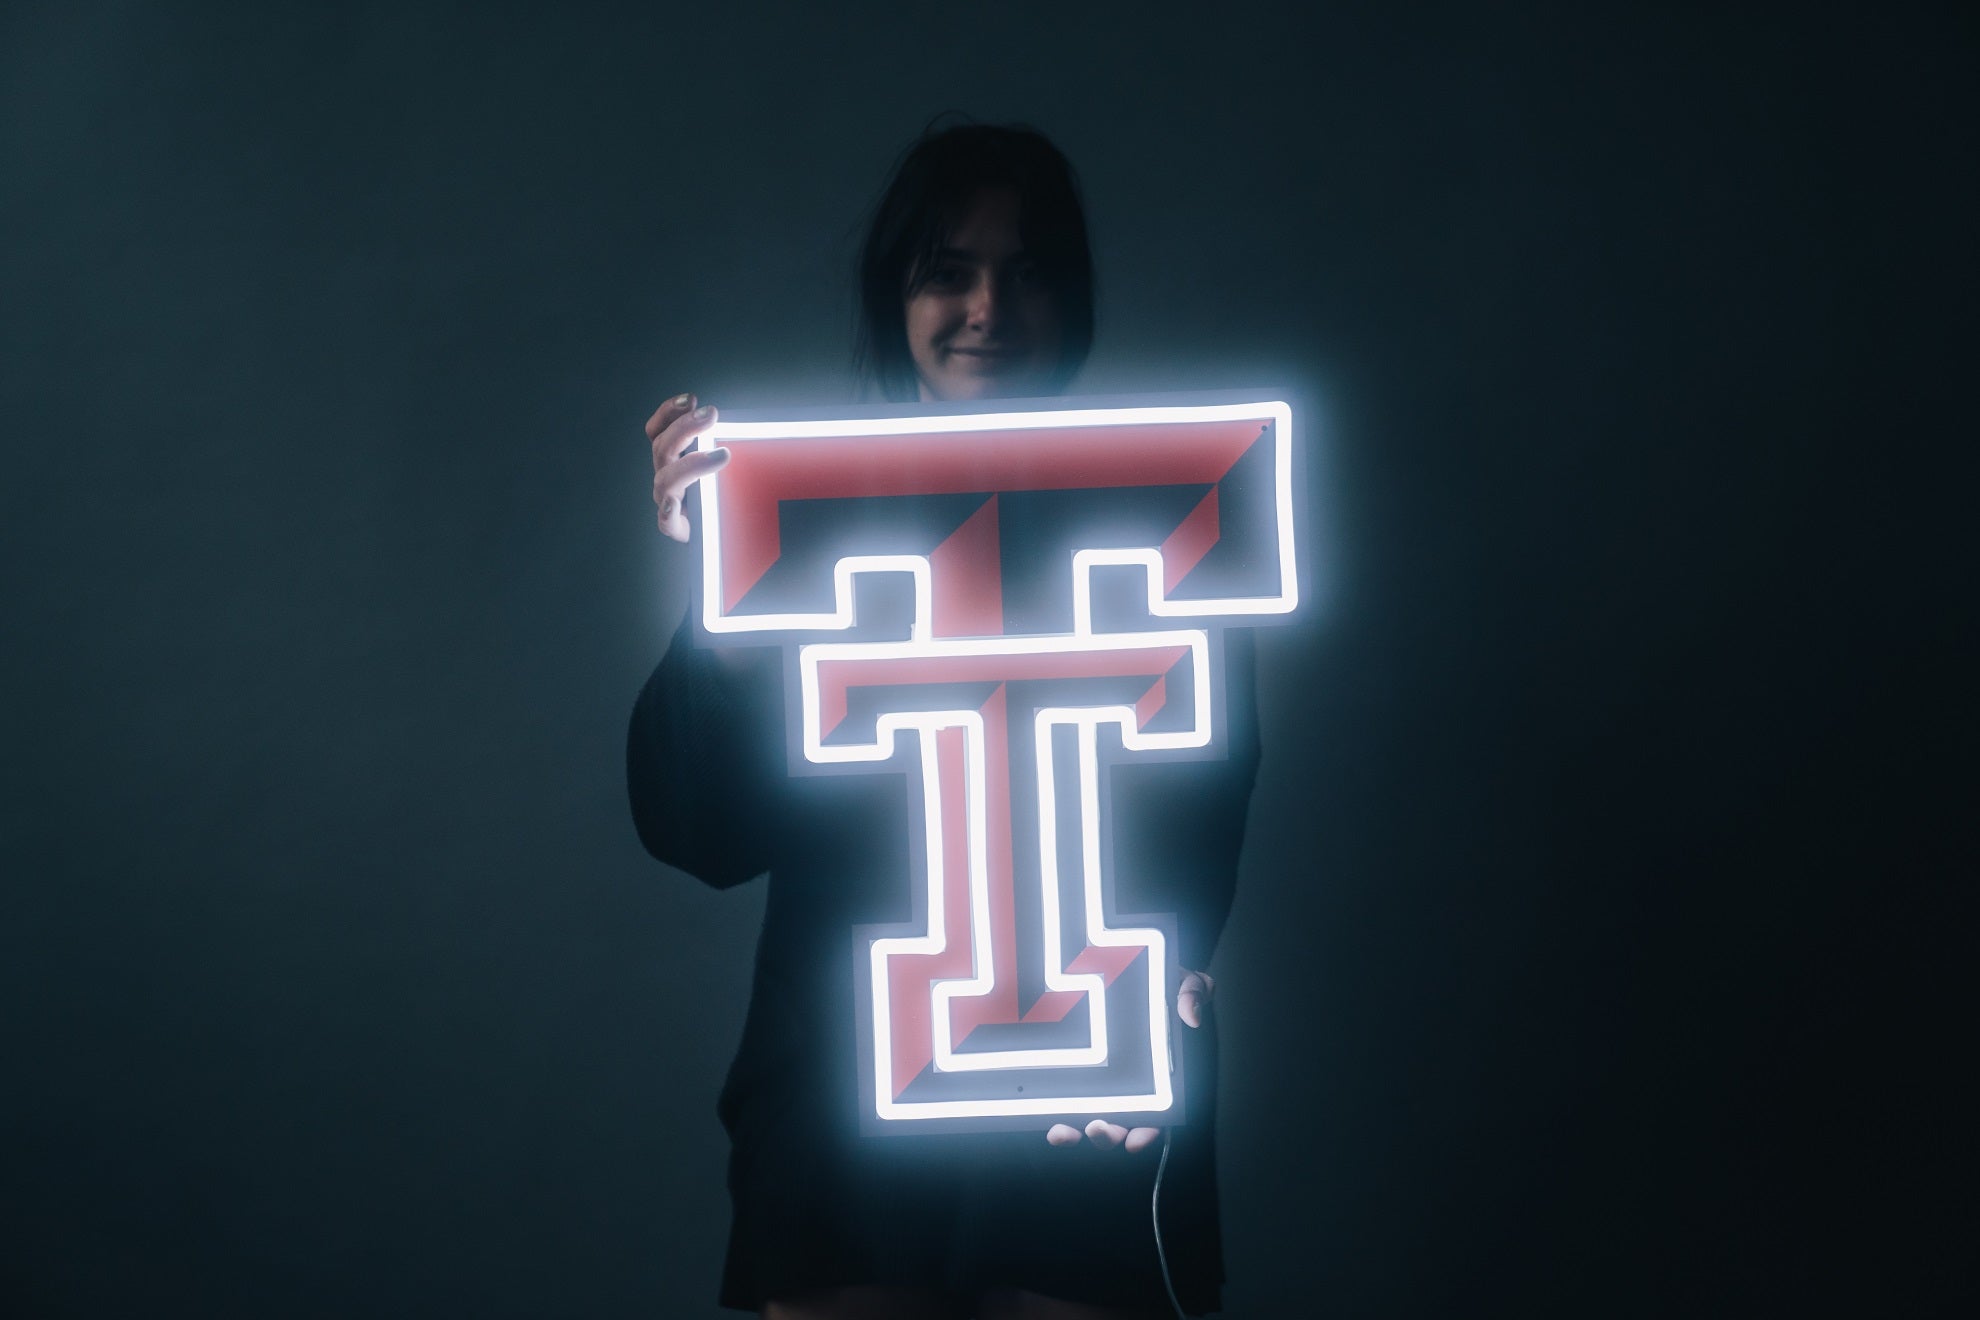 Texas Tech Red Raiders Neon Tabletop Sign